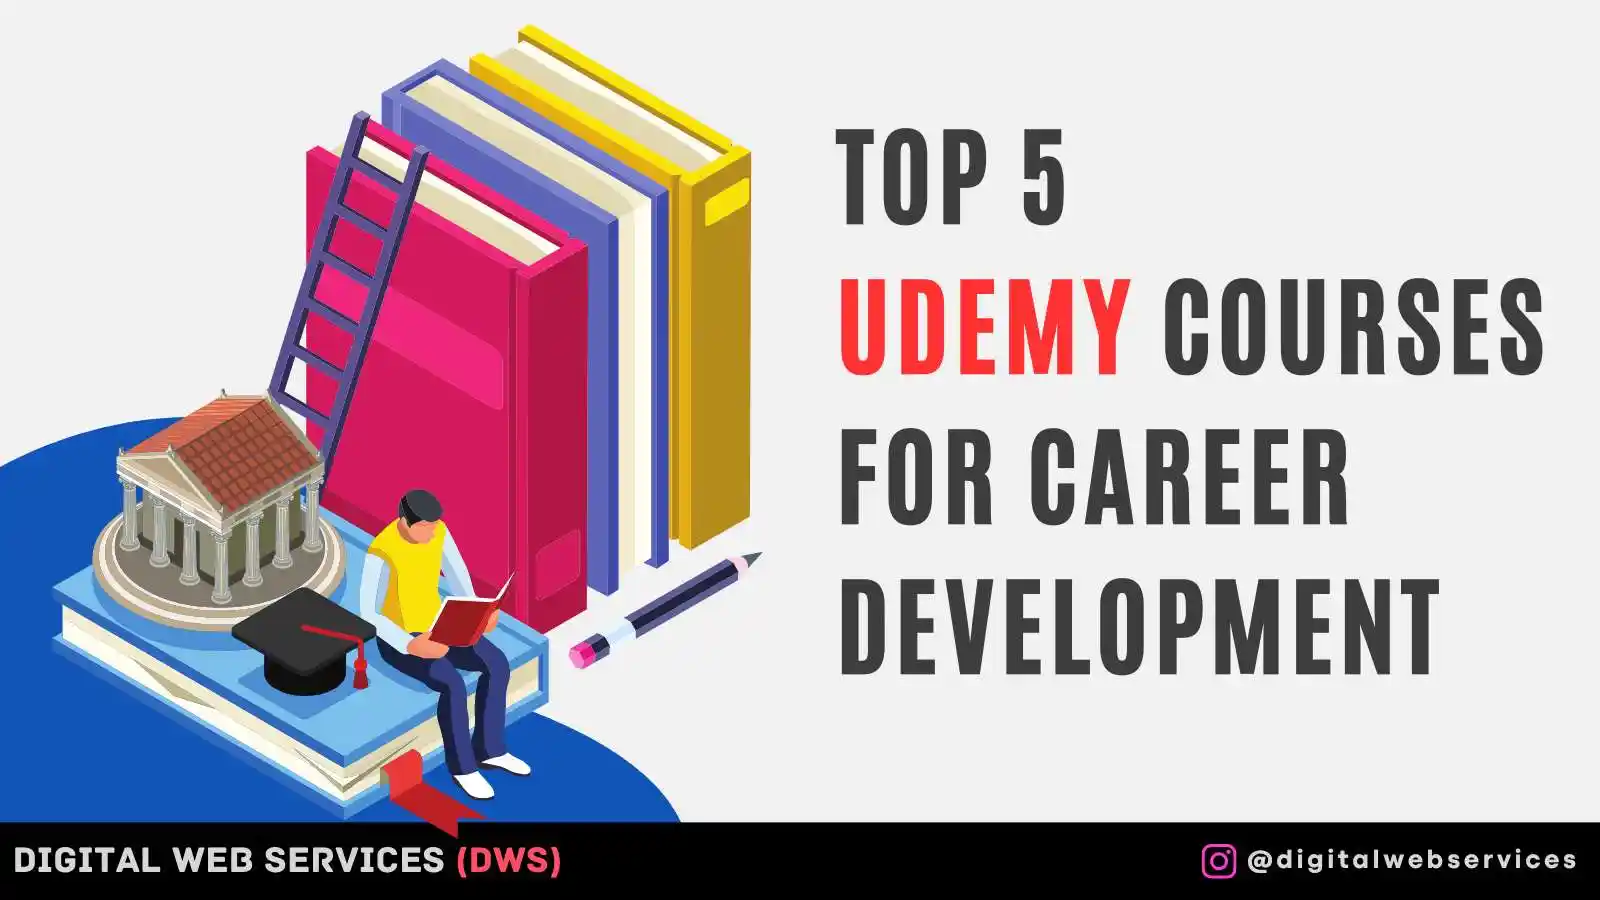 Top 5 Udemy Courses for Career Development